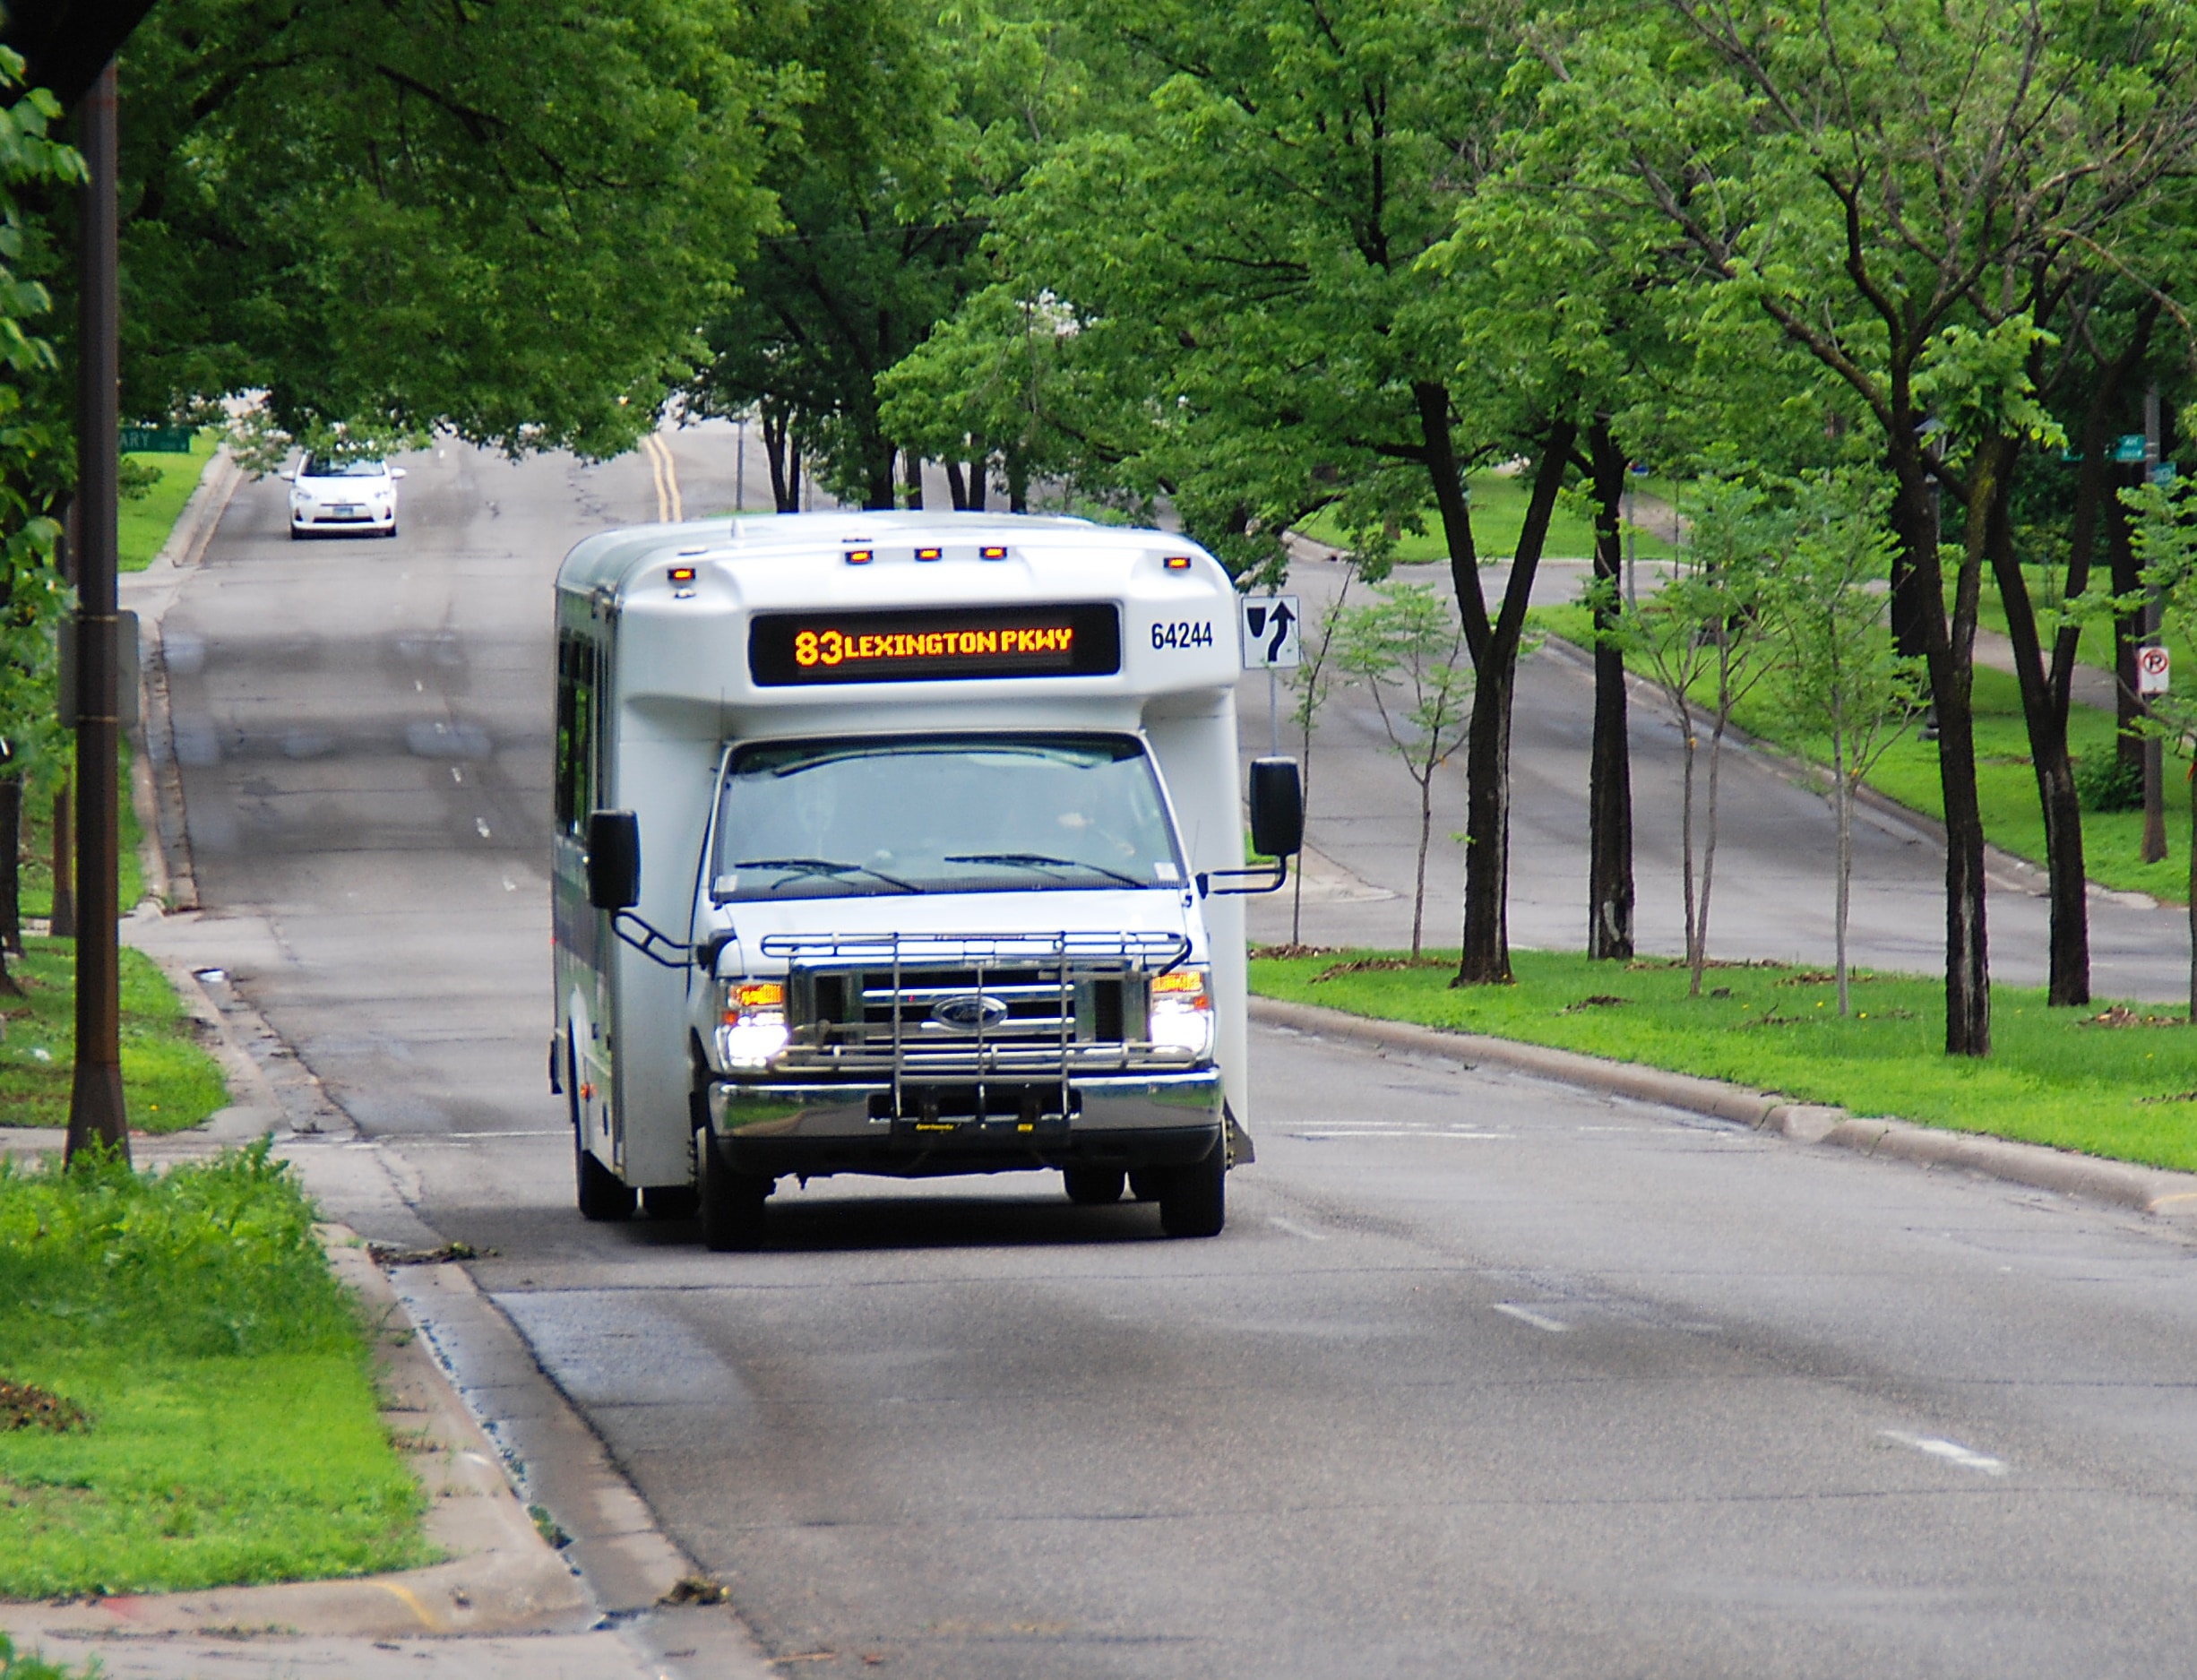 How to get to St. Paul Park by Bus?